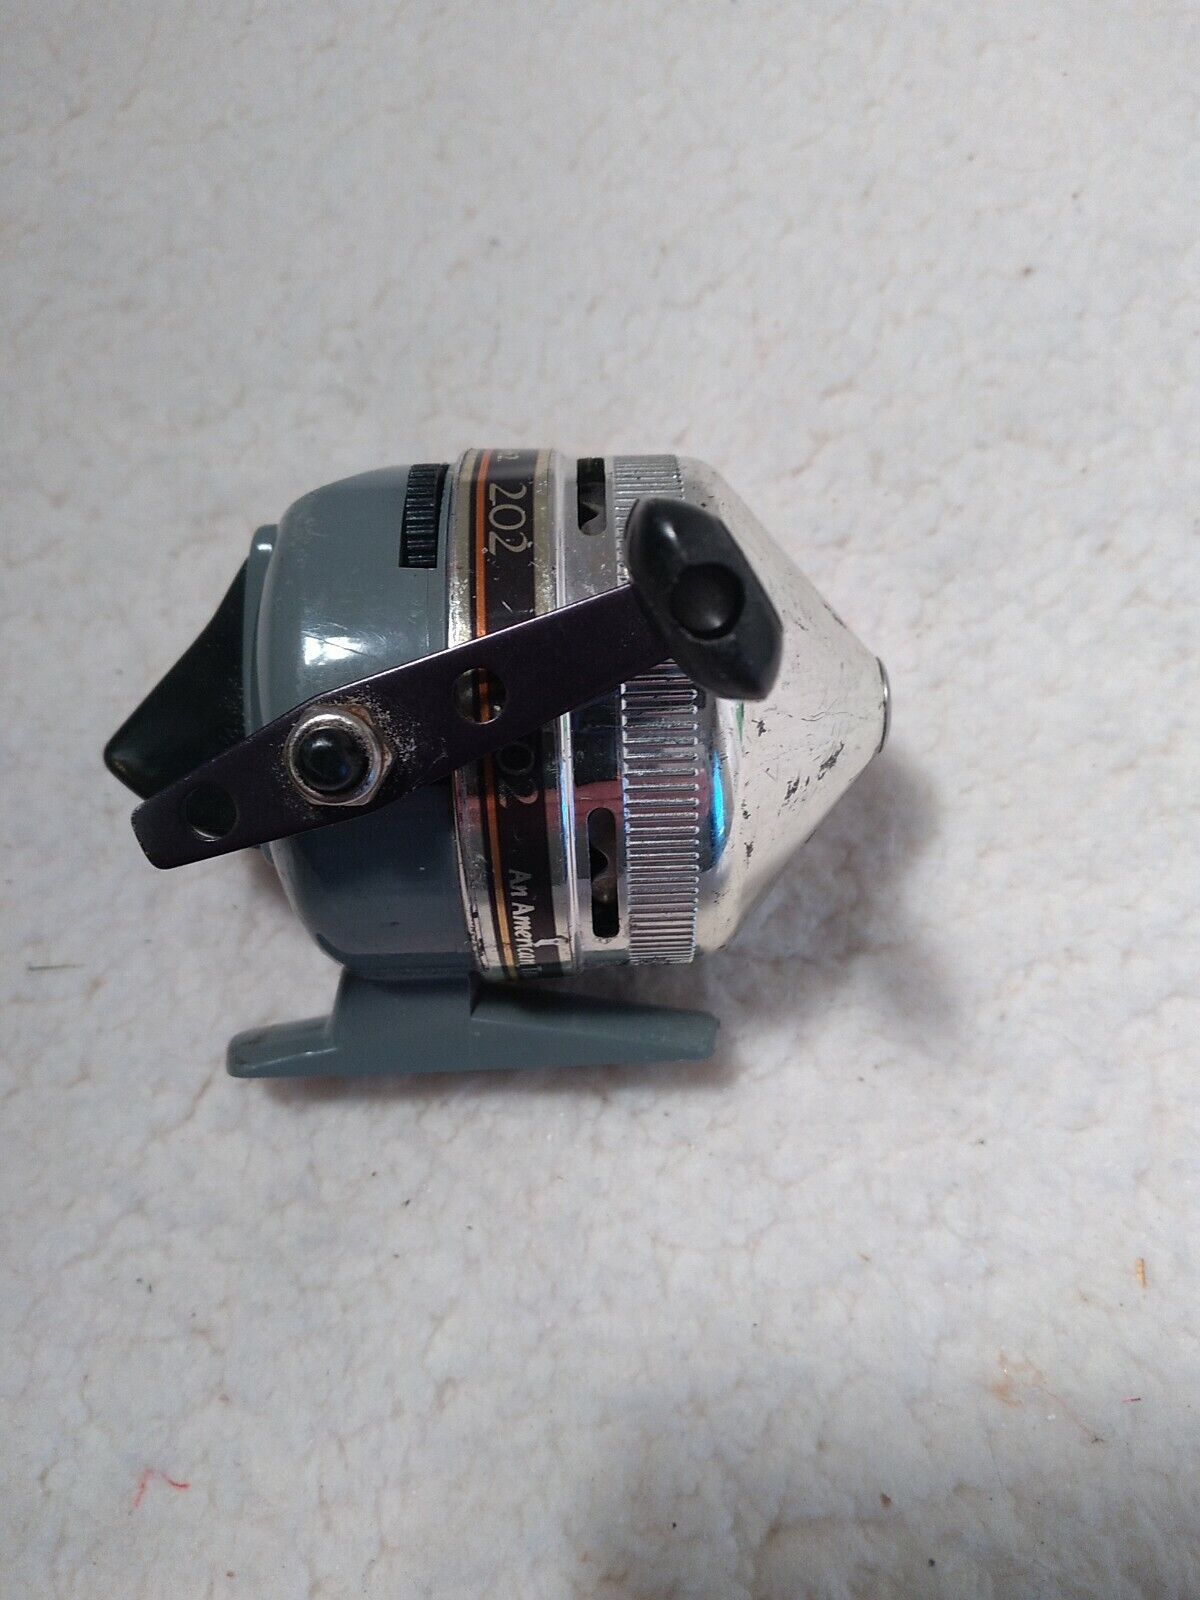 Vintage Zebco 202 Fishing Reel and 23 similar items